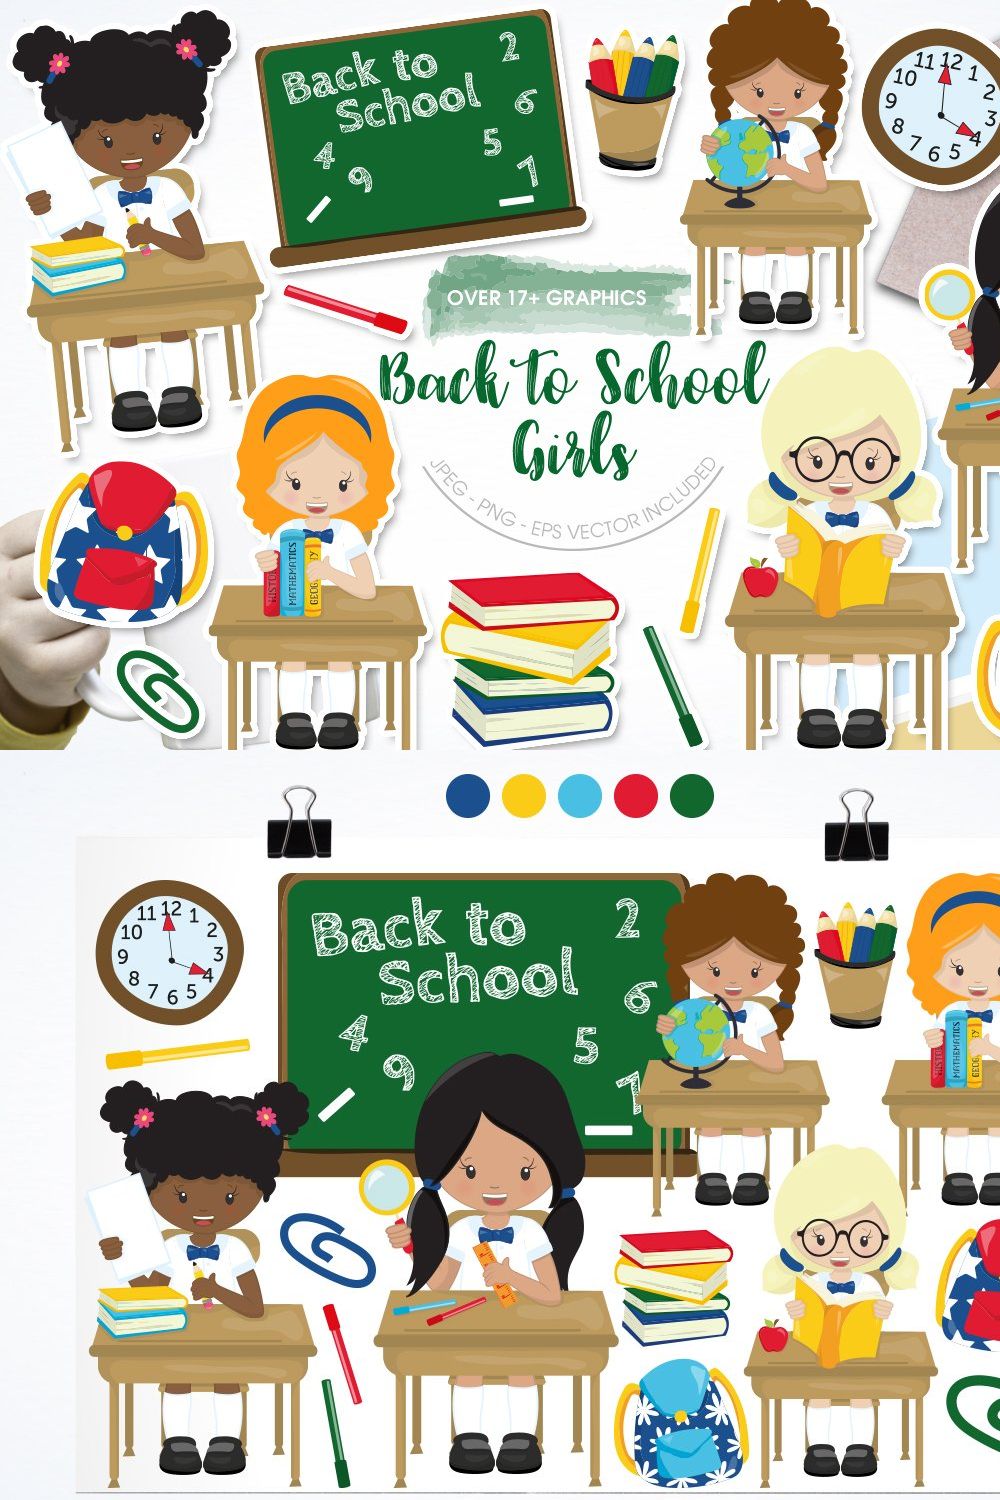 Back to school girls pinterest preview image.